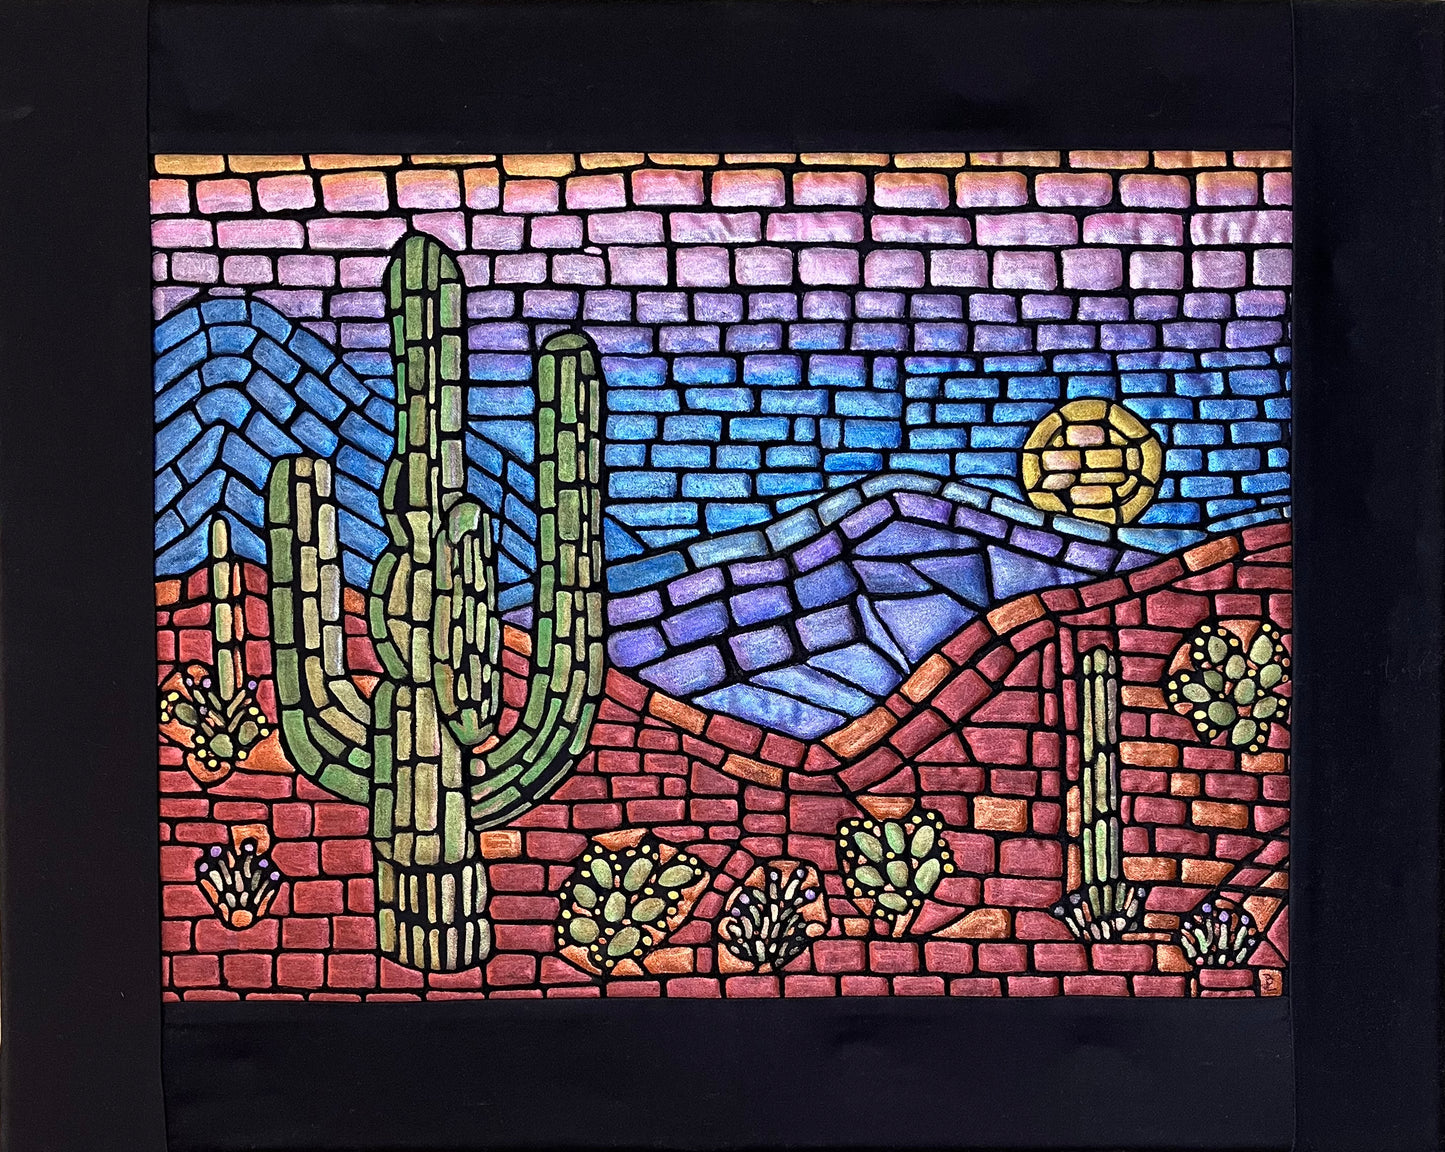 Saguaro - Connection to the Desert